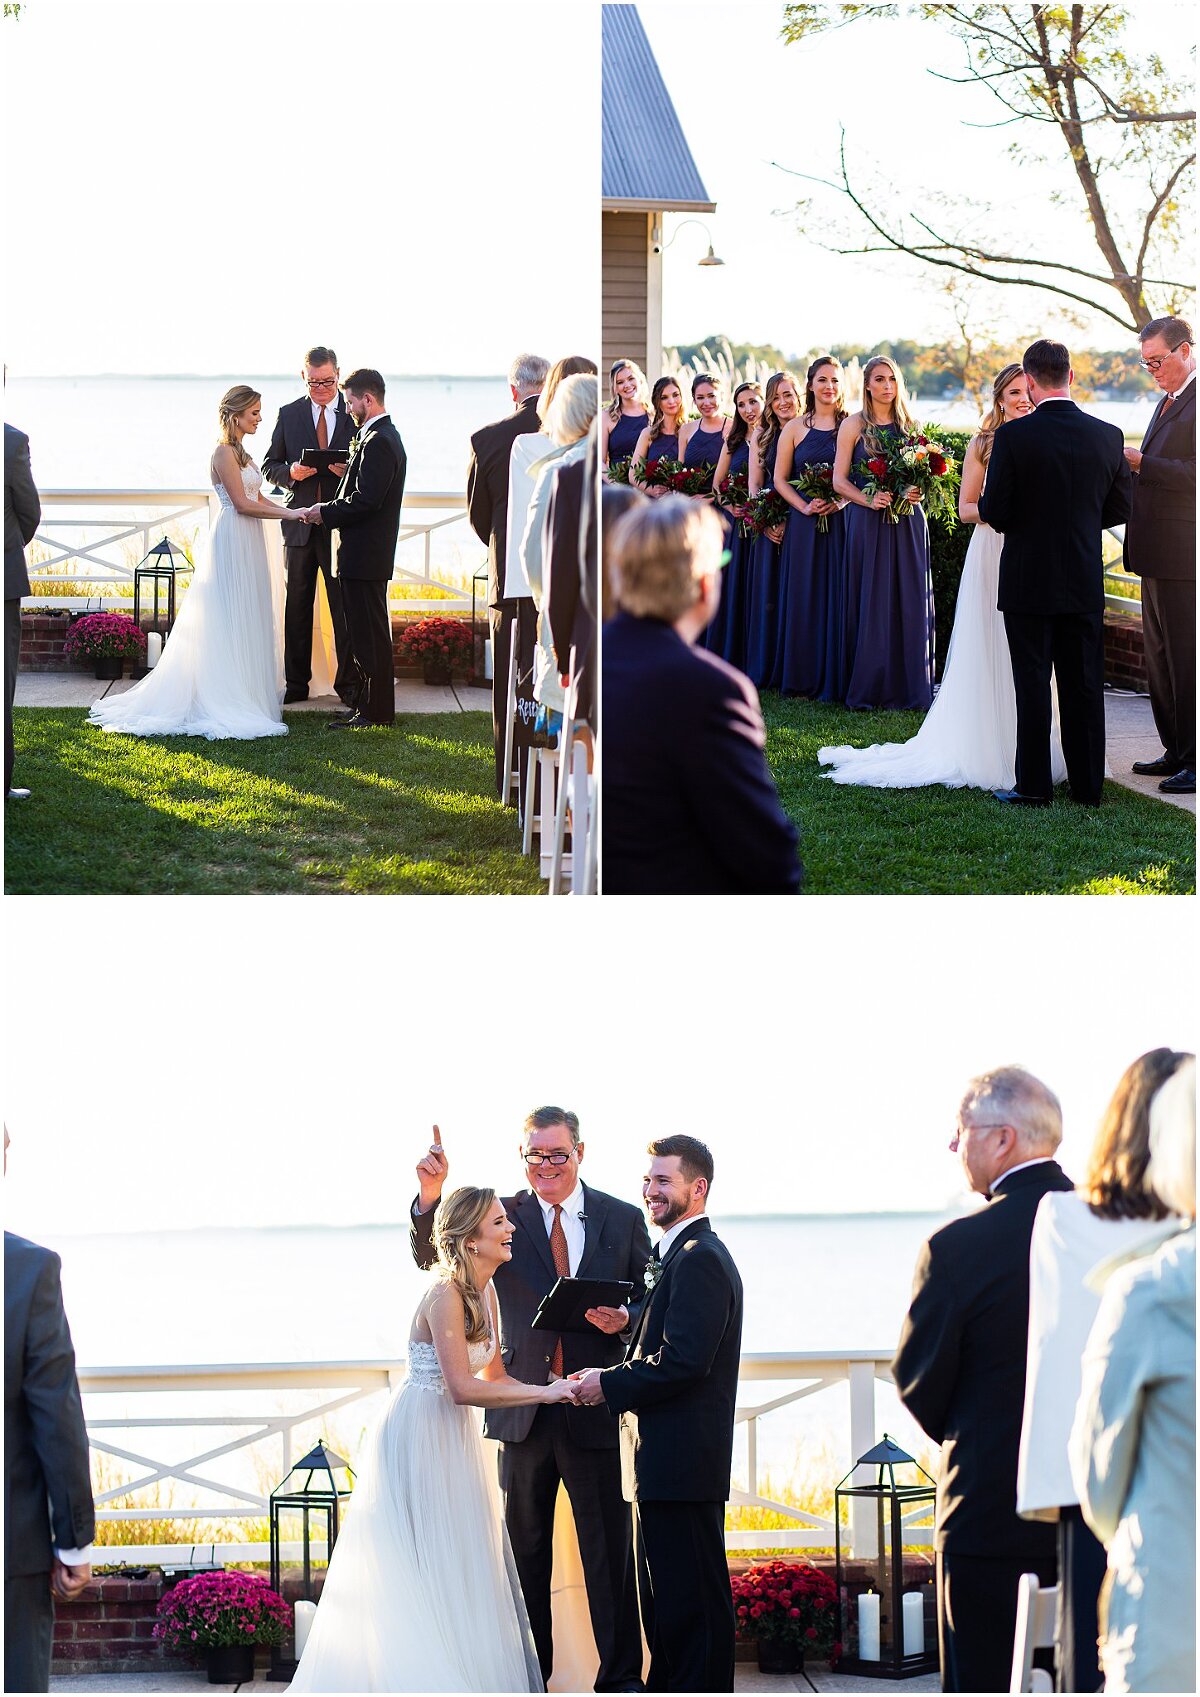 Nicki and Jordan’s sunset wedding took place just across the Bay Bridge, at the Chesapeake Bay Beach Club! I don’t usually travel to Maryland for weddings, but when I do, they’re breathtaking! This wedding was FULL of funny stories, goofy groomsmen, a funny wedding blunder, and suspenders! Photo by Bethanie Vetter Photography LLC, second shot for Elizabeth M. Photography #Marylandwedding #marylandbride #bhldndress #bhldnbride #chesapeakebay #chesapeakbaywedding #chesapeakebaybeachclub #beachwedding #beachclubwedding #weddingphotographer #bethanievetterphotography #bethanievetterweddings #eastcoastphotography #eastcoast #eastcoastphotographer